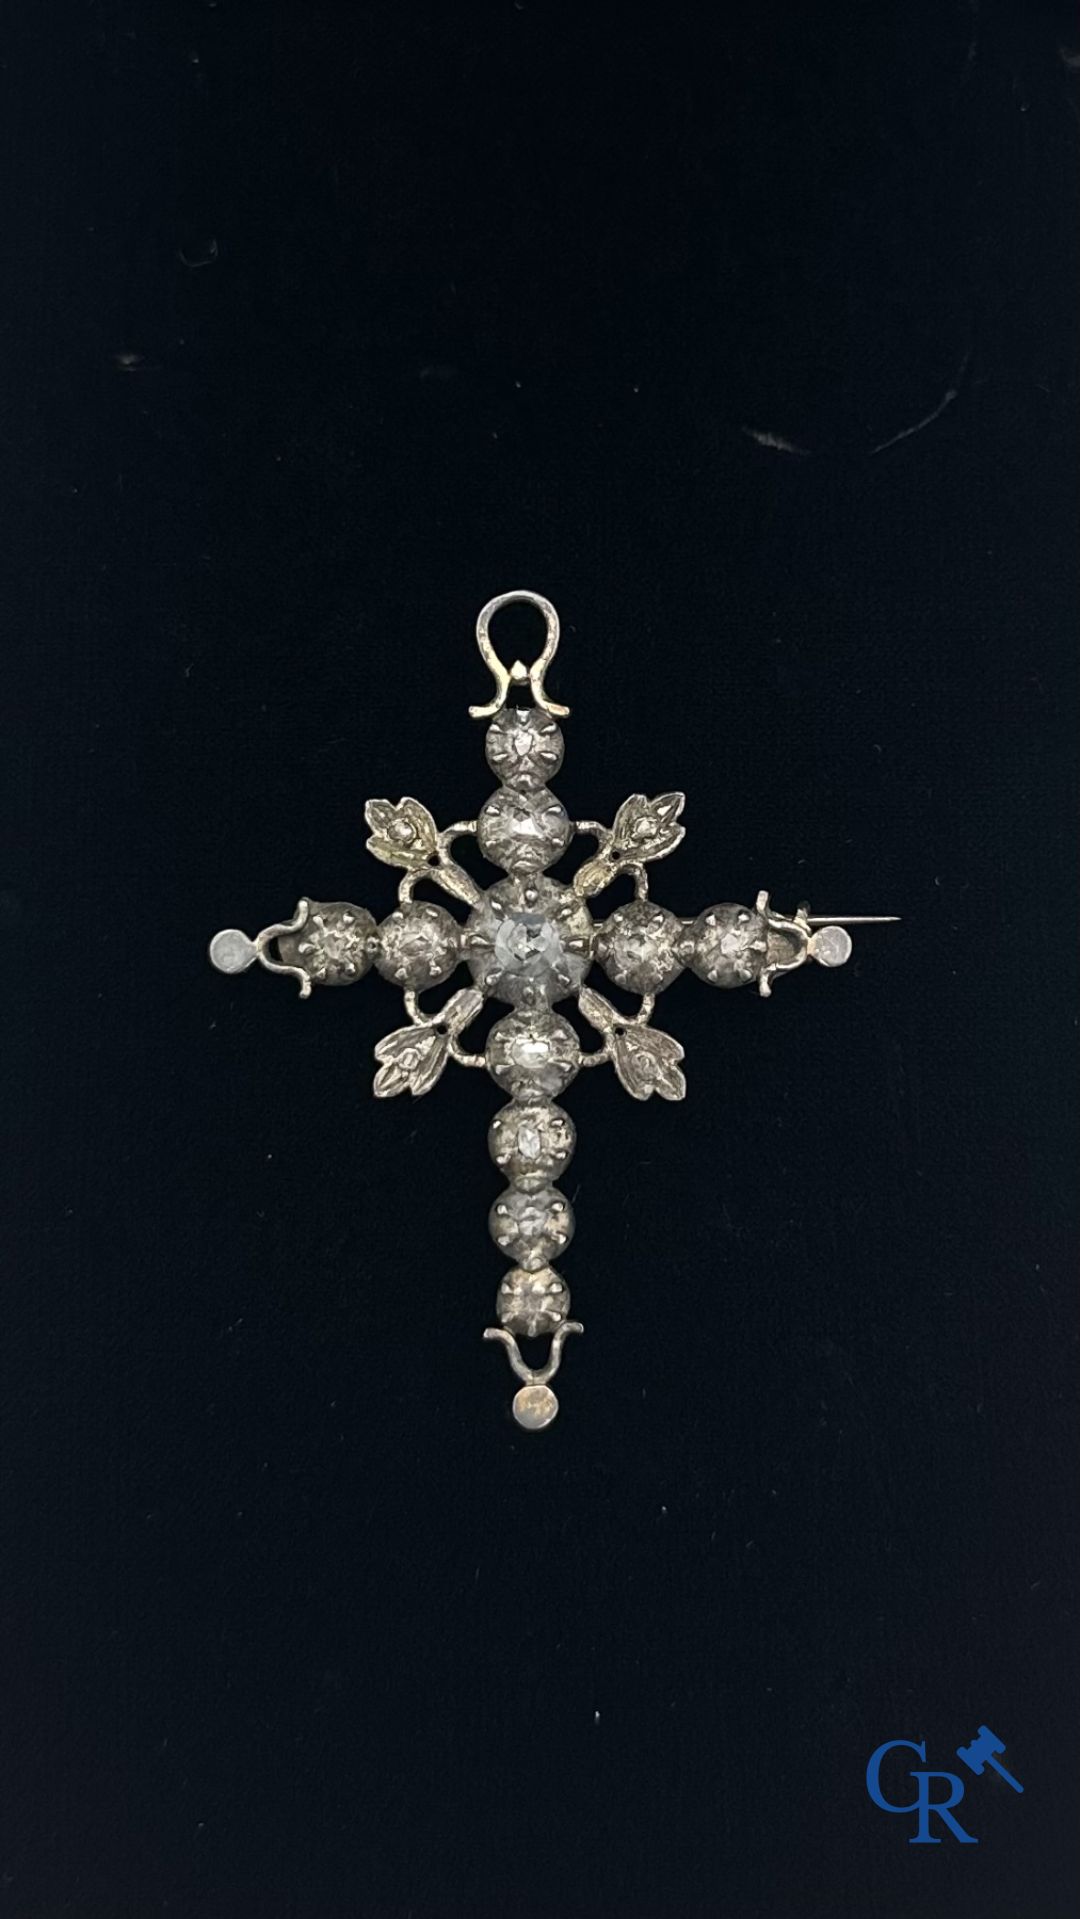 Jewellery: Lot of 2 Flemish crosses in silver and diamond. - Image 3 of 4